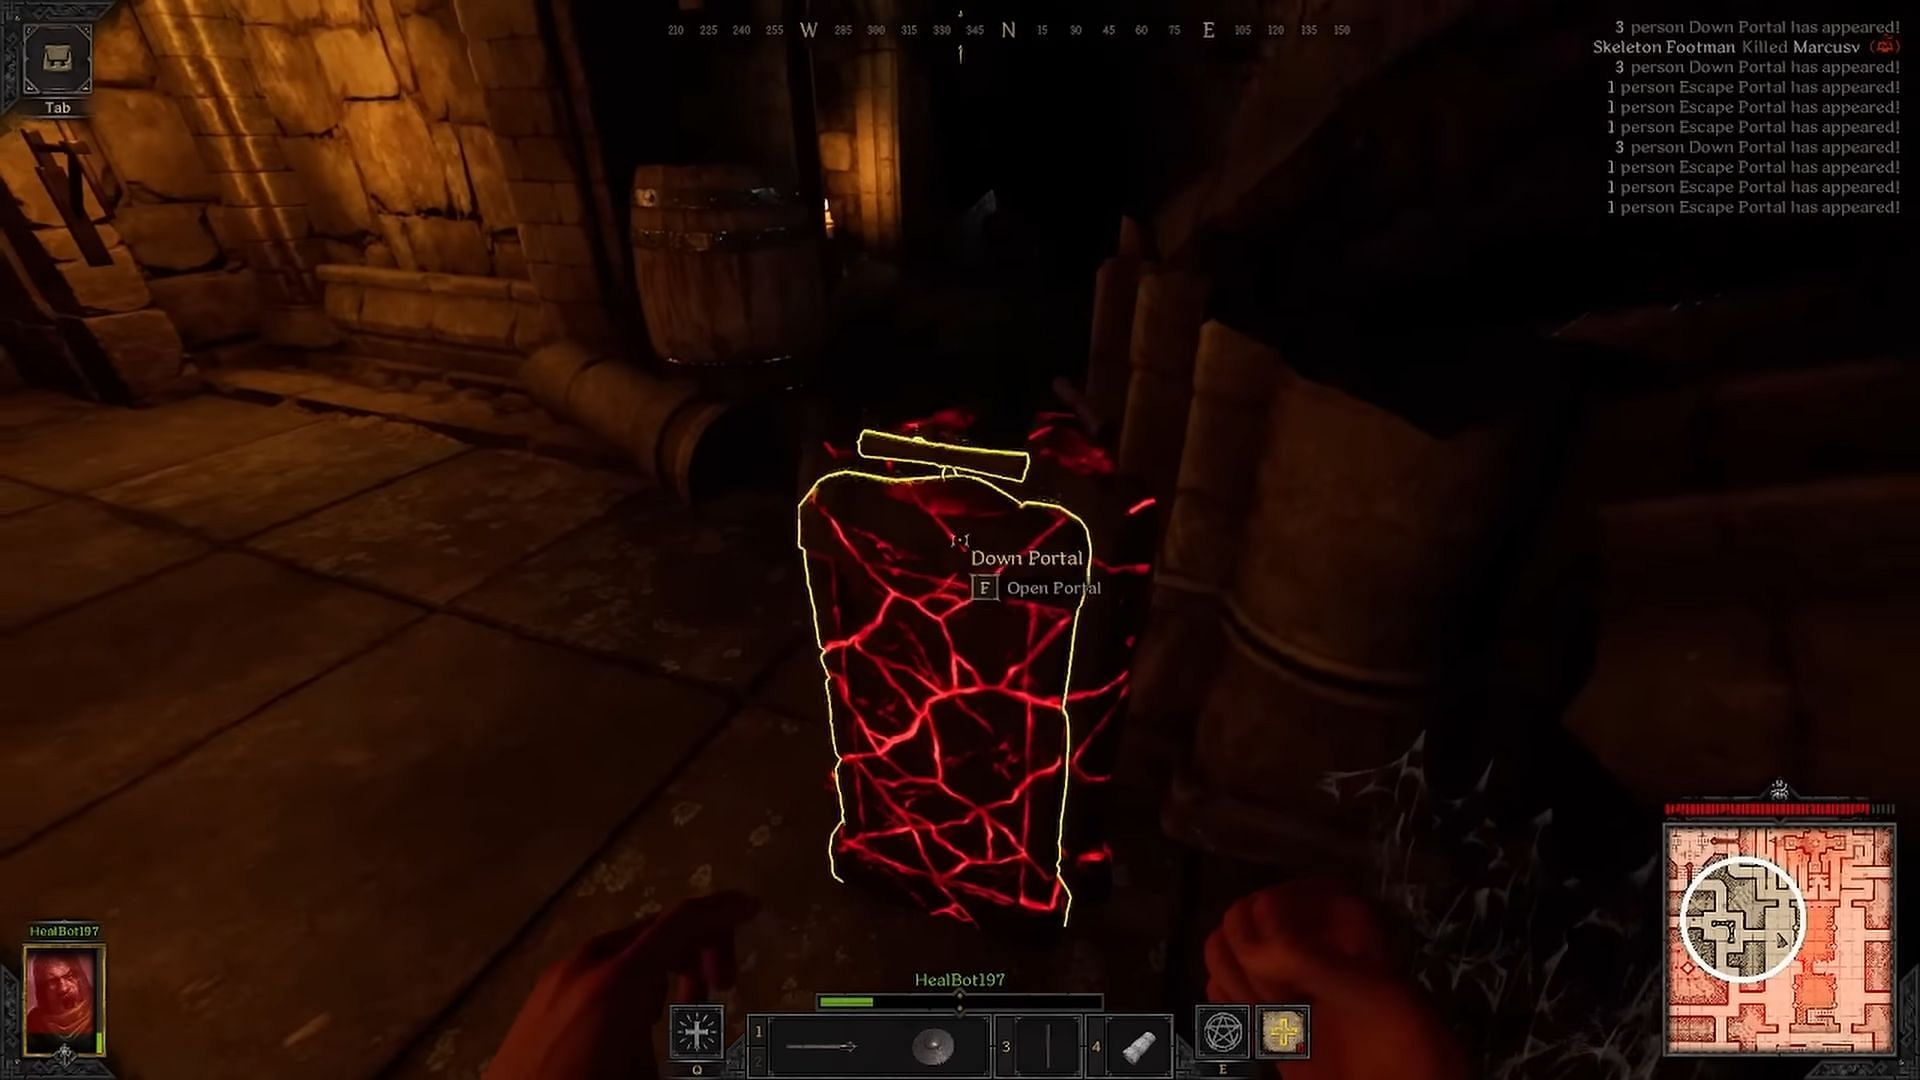 Down Portal in Dark and Darker (Image via Ironmace and YT/@VideoGameDataBank)